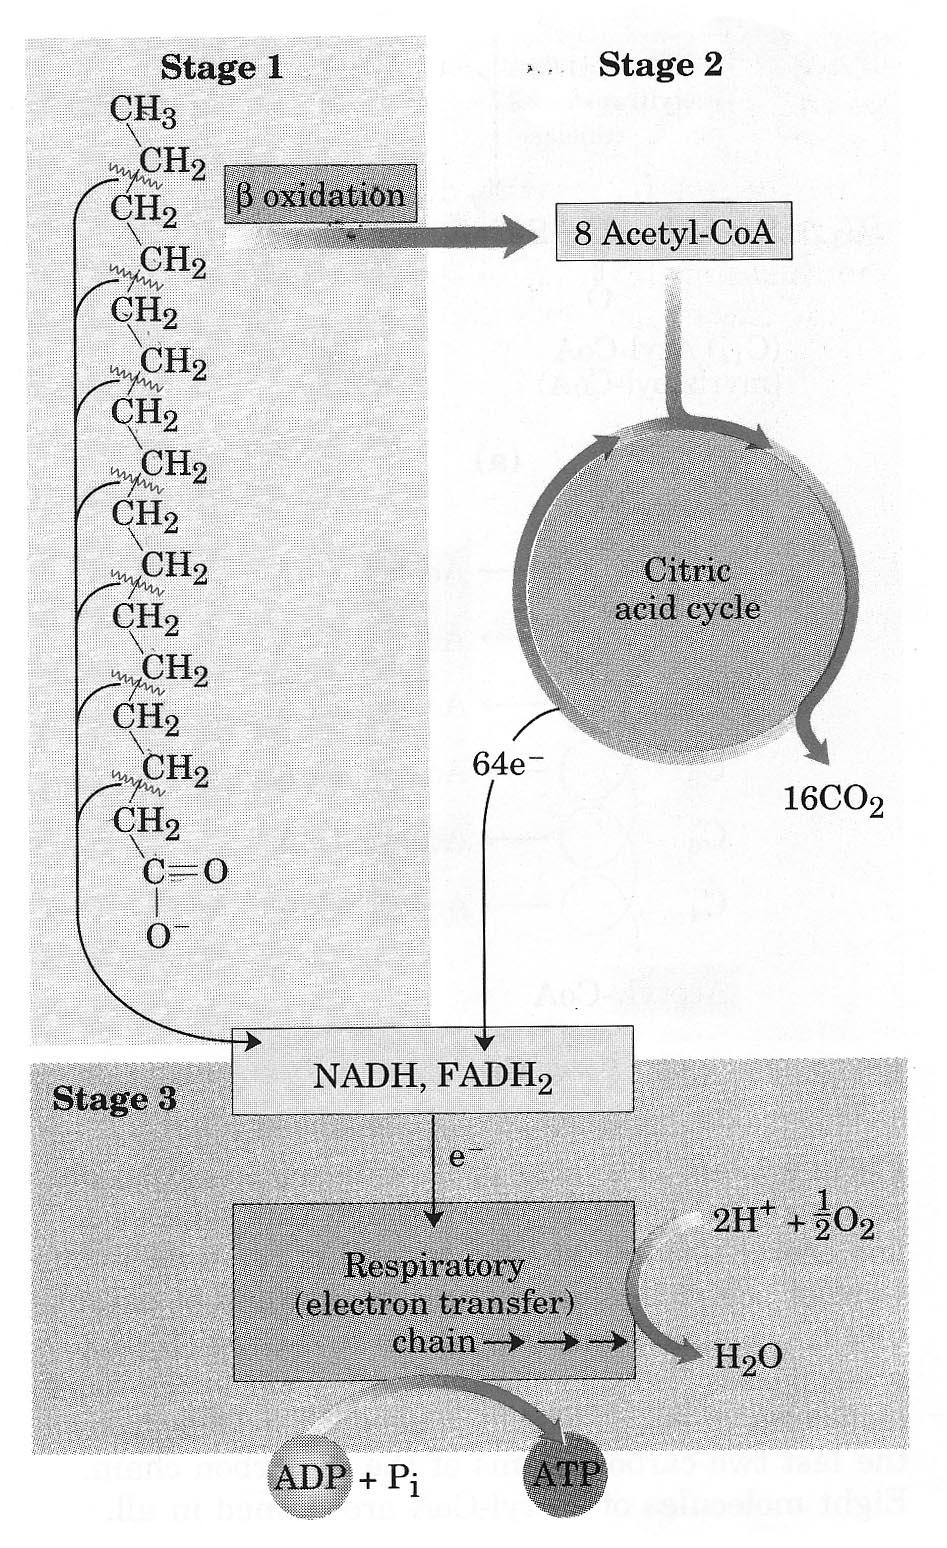 C. Fate of products of lipolysis 1. Glycerol à liver for synthesis of glucose or G-3-P (via glycerol kinase). 2. Fatty acids a. Oxidation within adipose tissue (minor) b.